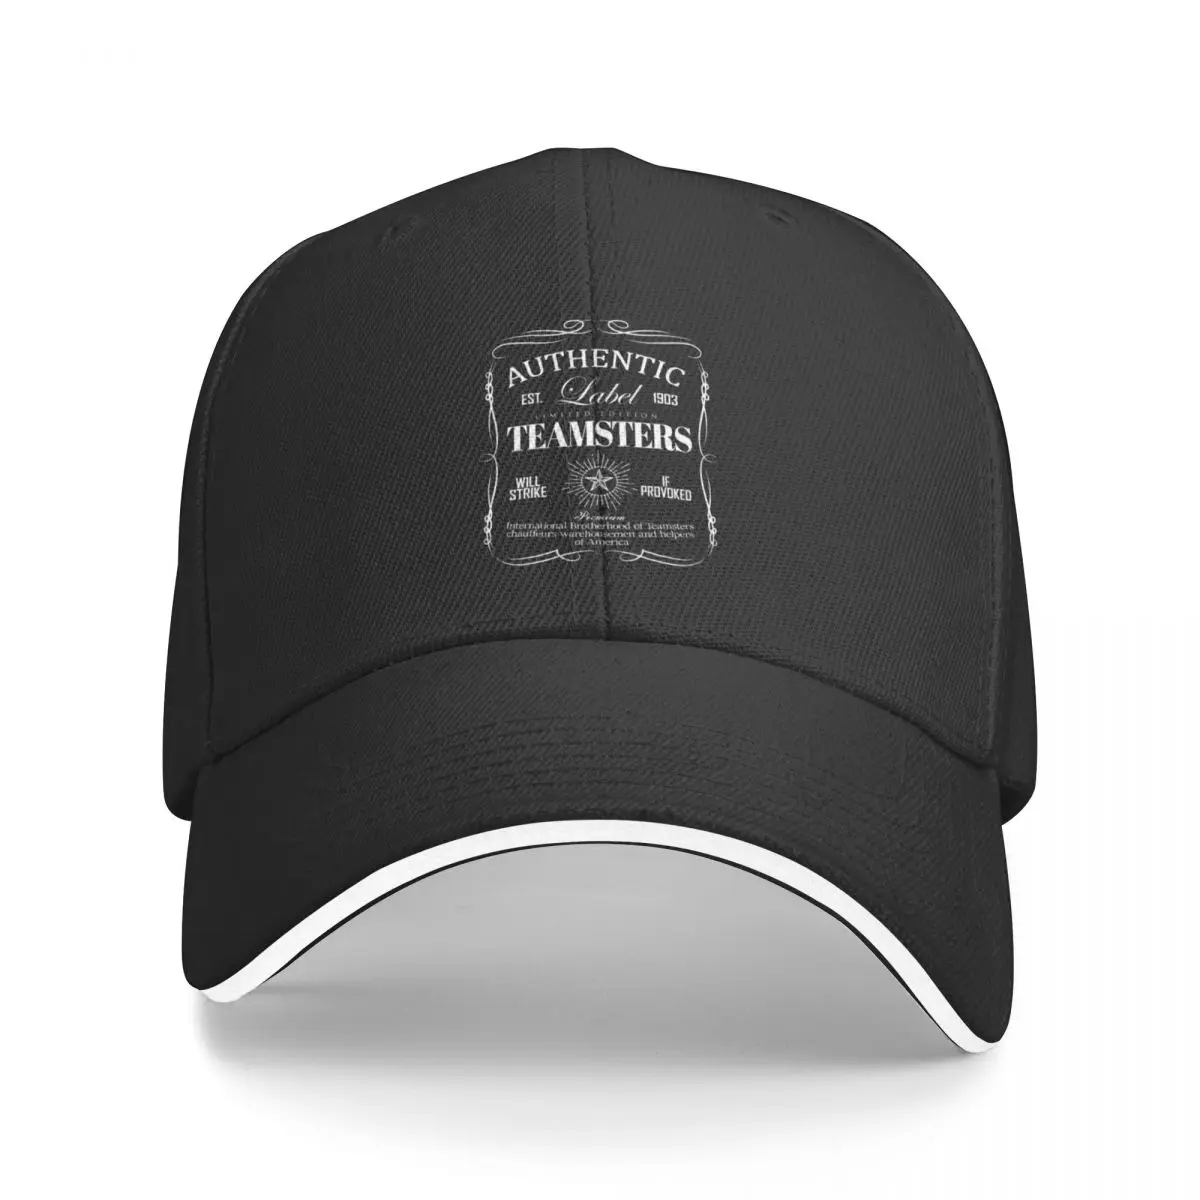 

Teamsters essential union worker, Teamster Whiskey Label, funny Trucker shirt Baseball Cap sun hat For Men Women's